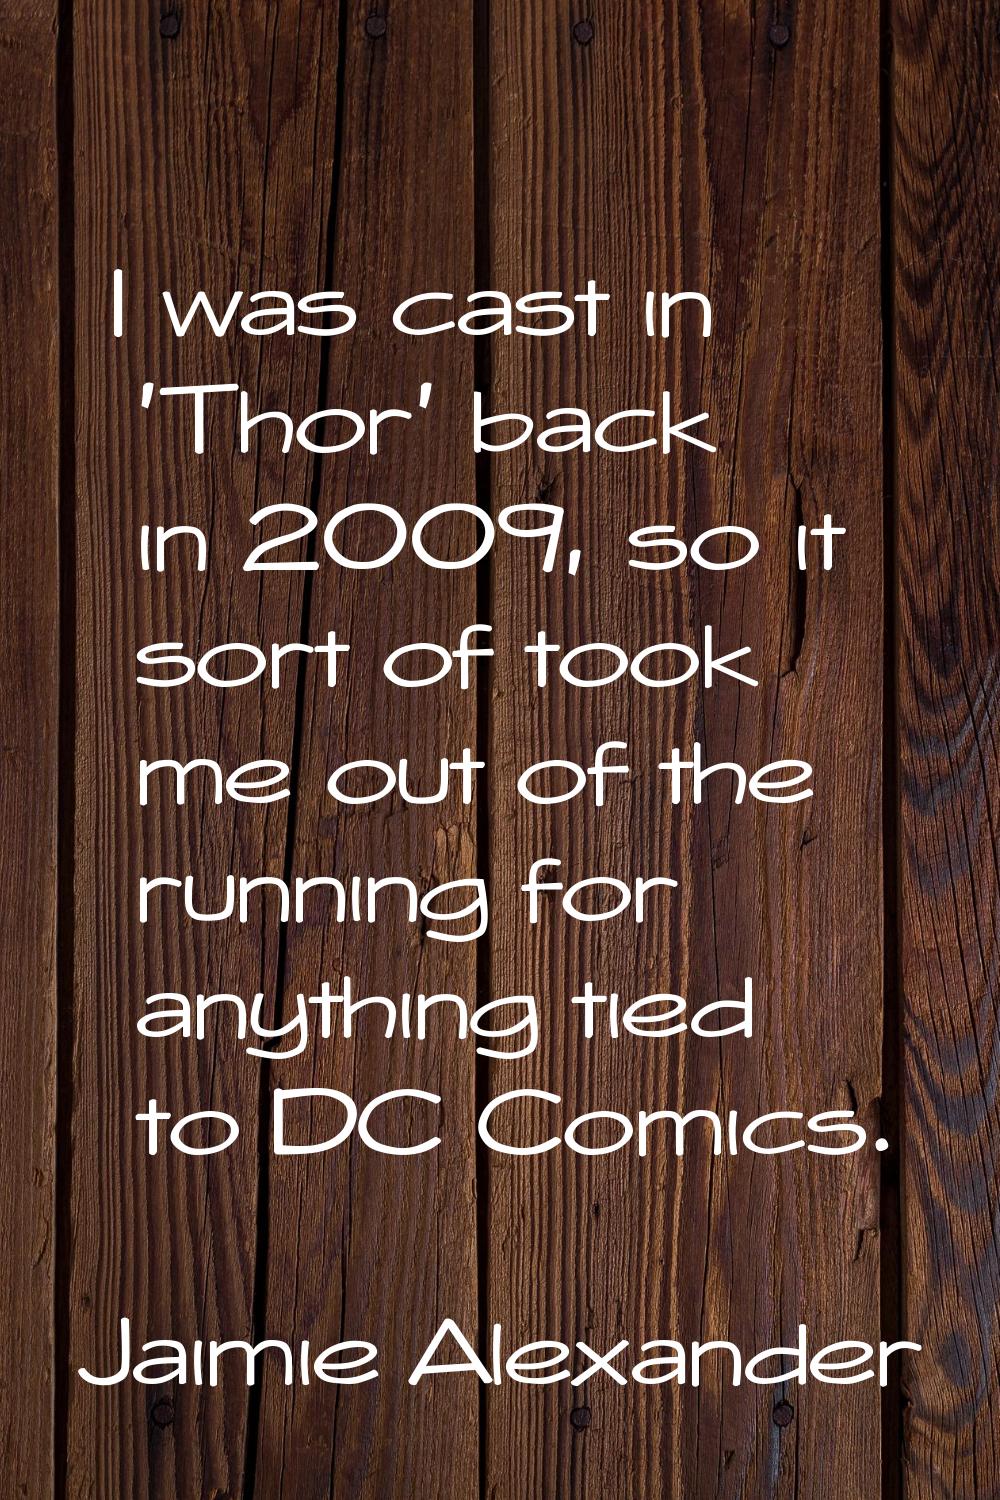 I was cast in 'Thor' back in 2009, so it sort of took me out of the running for anything tied to DC